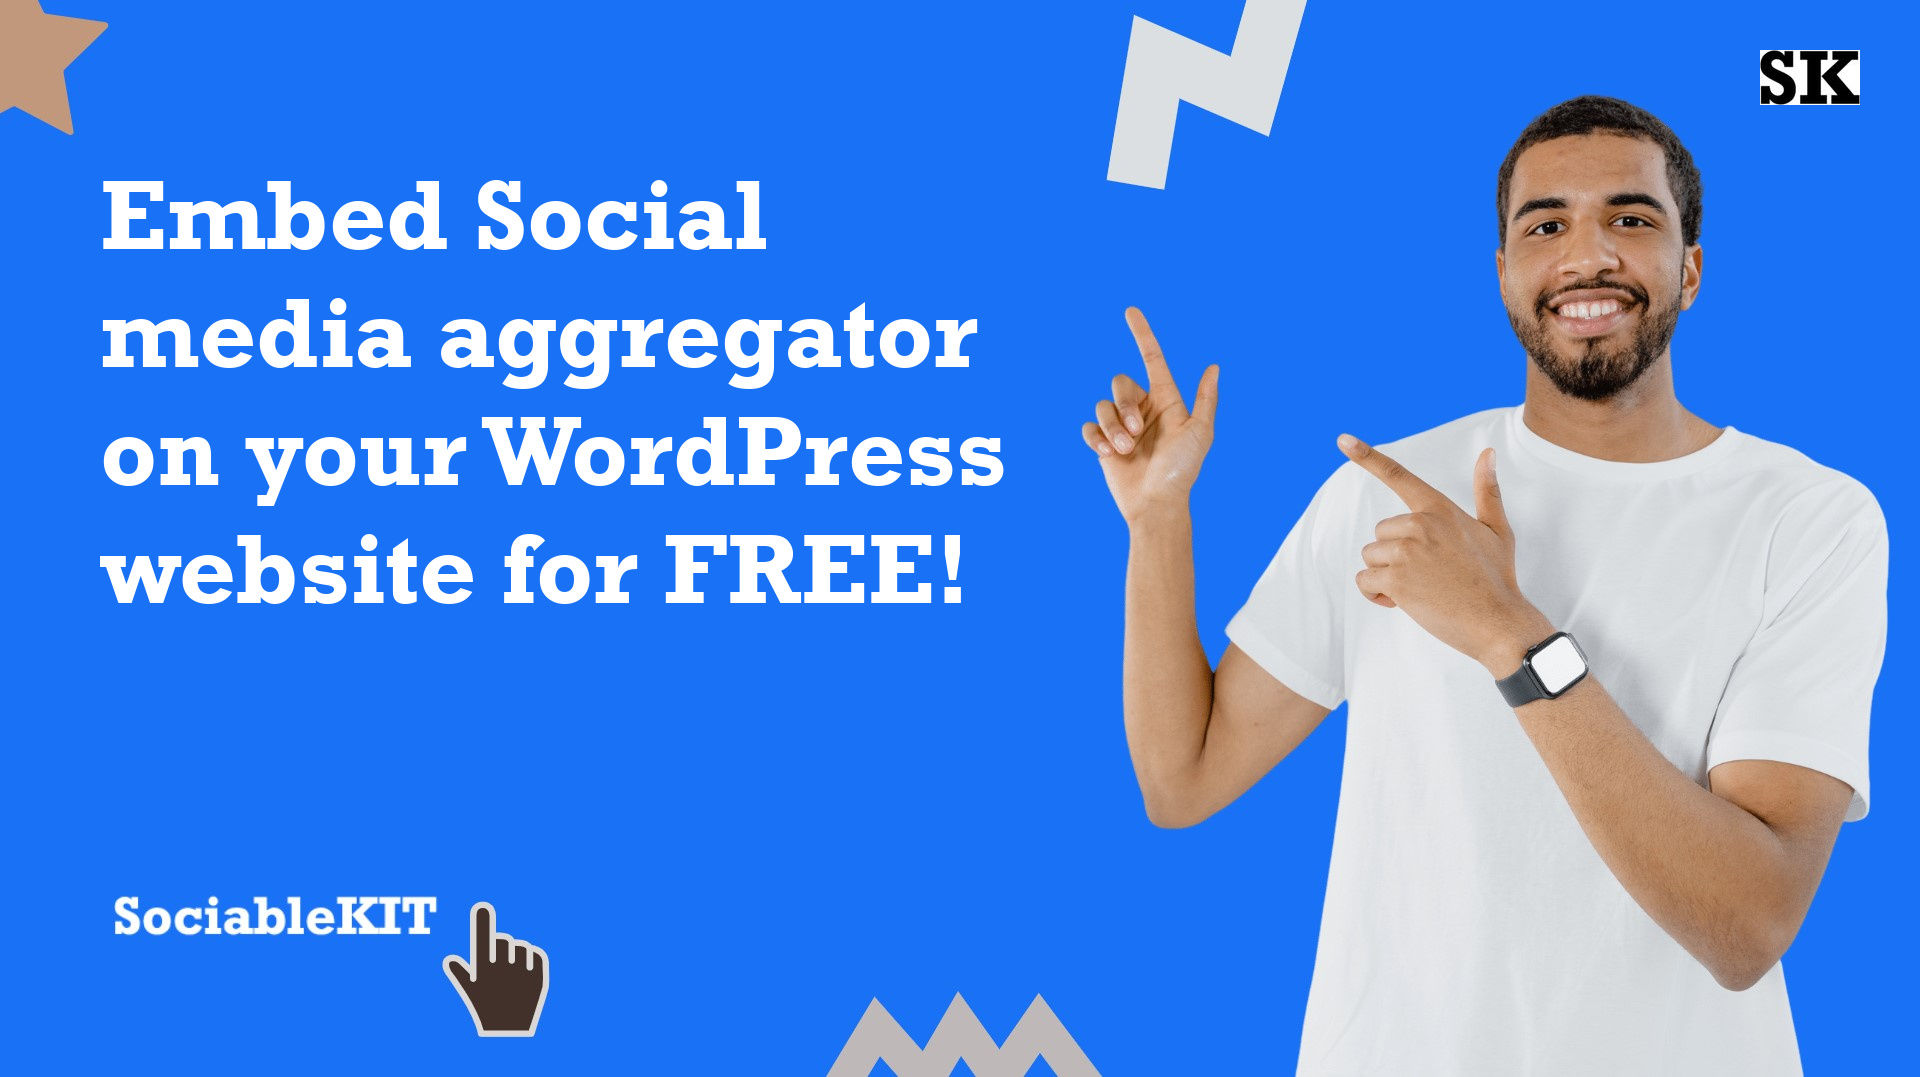 How to embed Social media aggregator on your WordPress website for FREE?